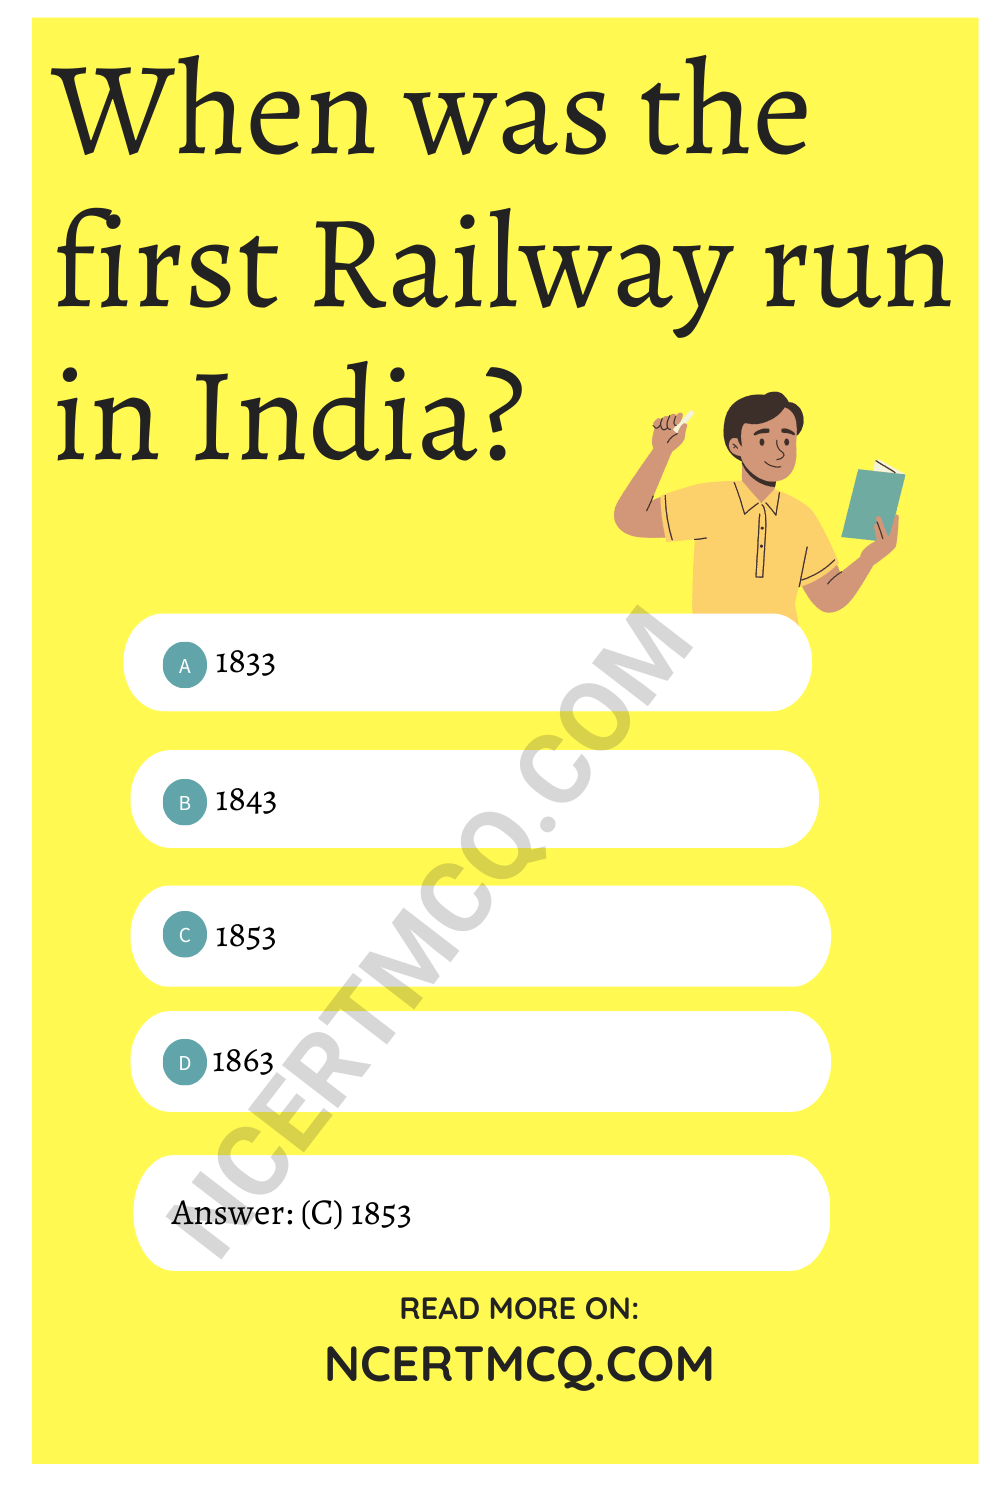 When was the first Railway run in India?